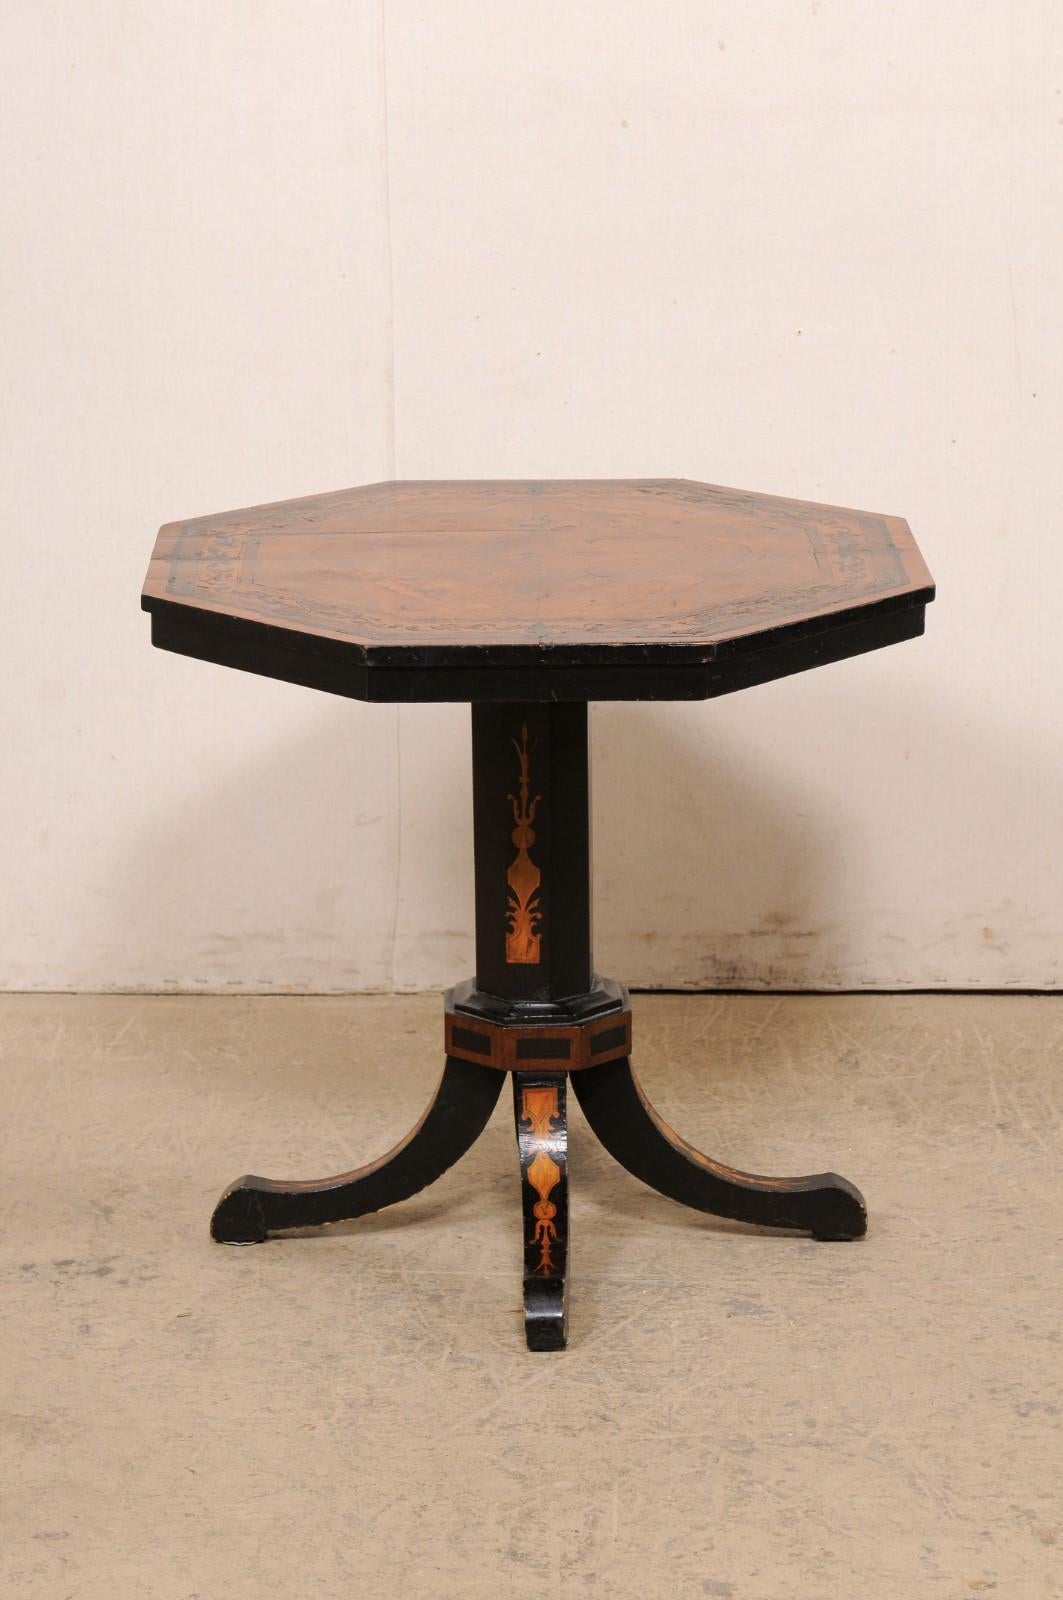 19th Century Octagonal Pedestal Table with Wonderful Inlay Embellishments 1